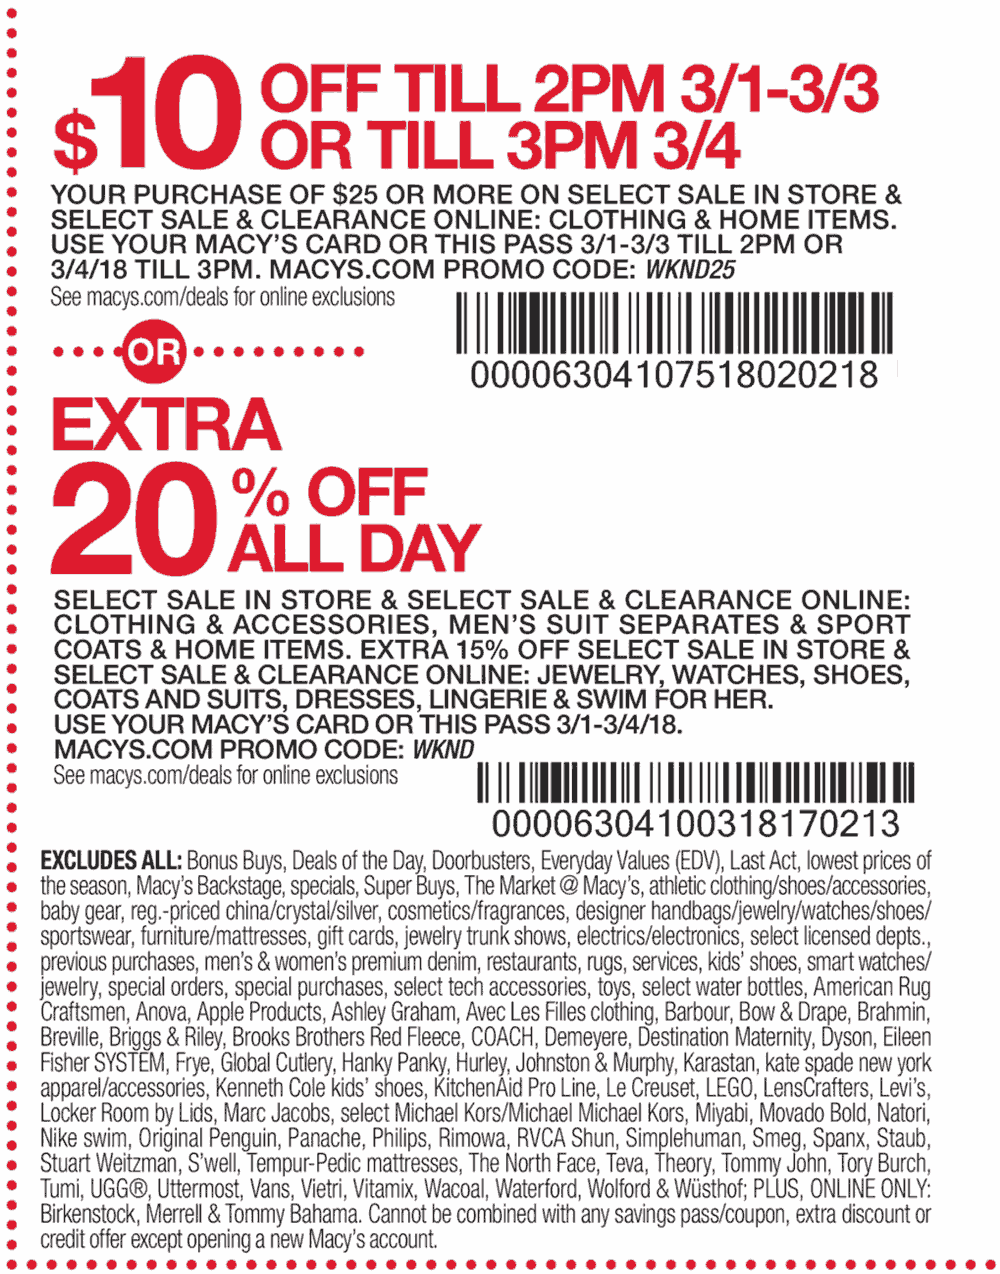 Macys September 2020 Coupons and Promo Codes